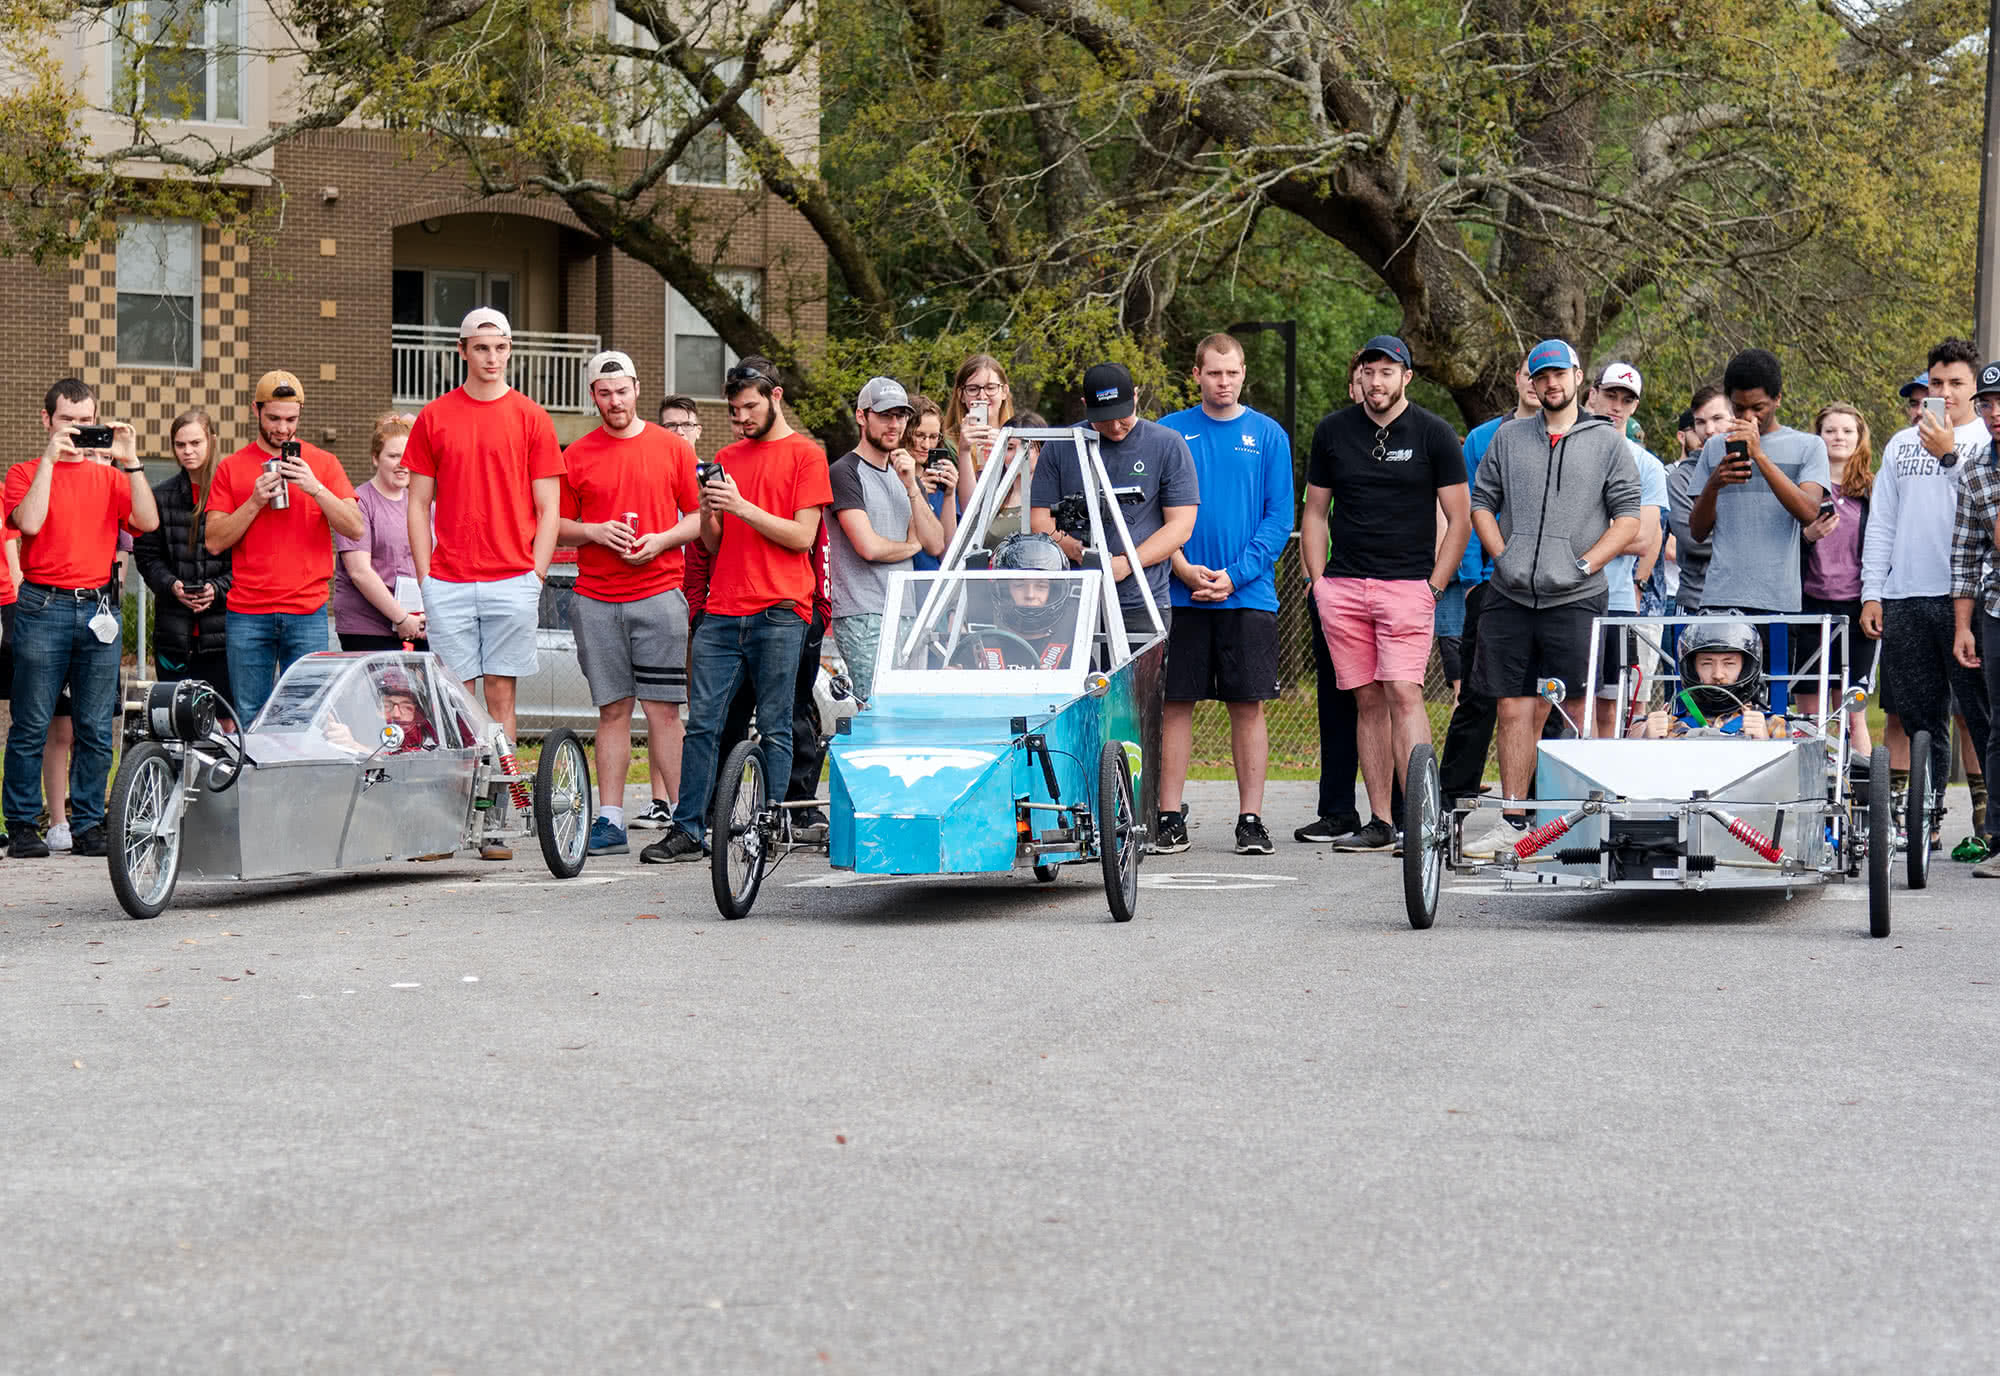 Students gather around 3 students in electric vehicles preparing to begin a race. 